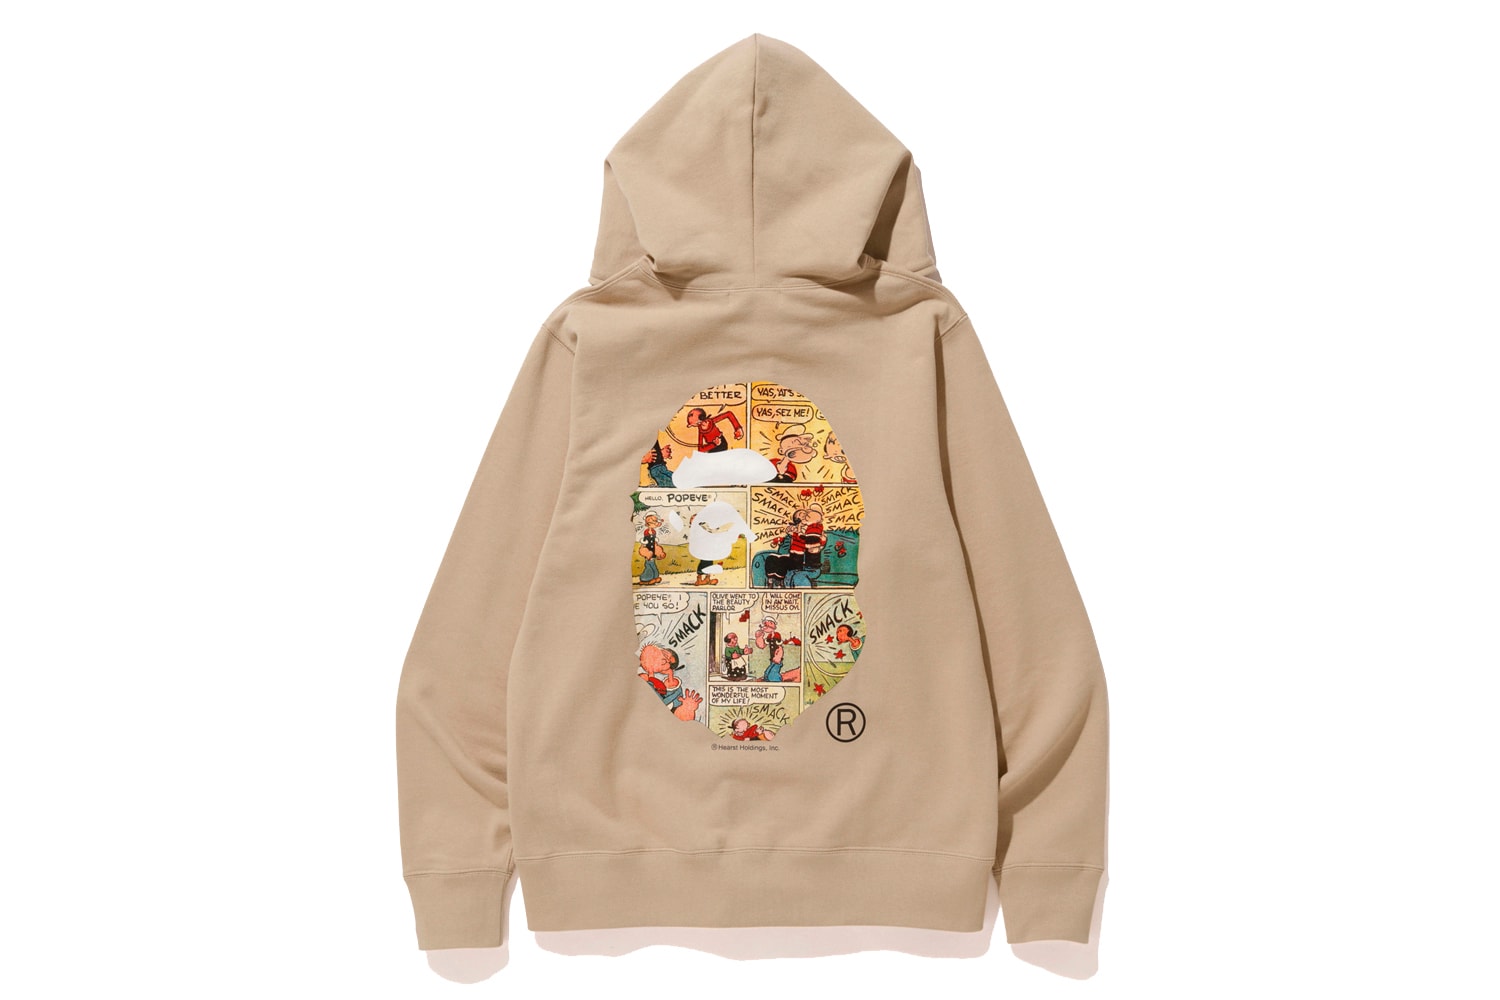 BAPE x Popeye 2018 Collection T-Shirts Hoodies Accessories Tote Bags Keychains Clocks Graphic Cartoon Cominc